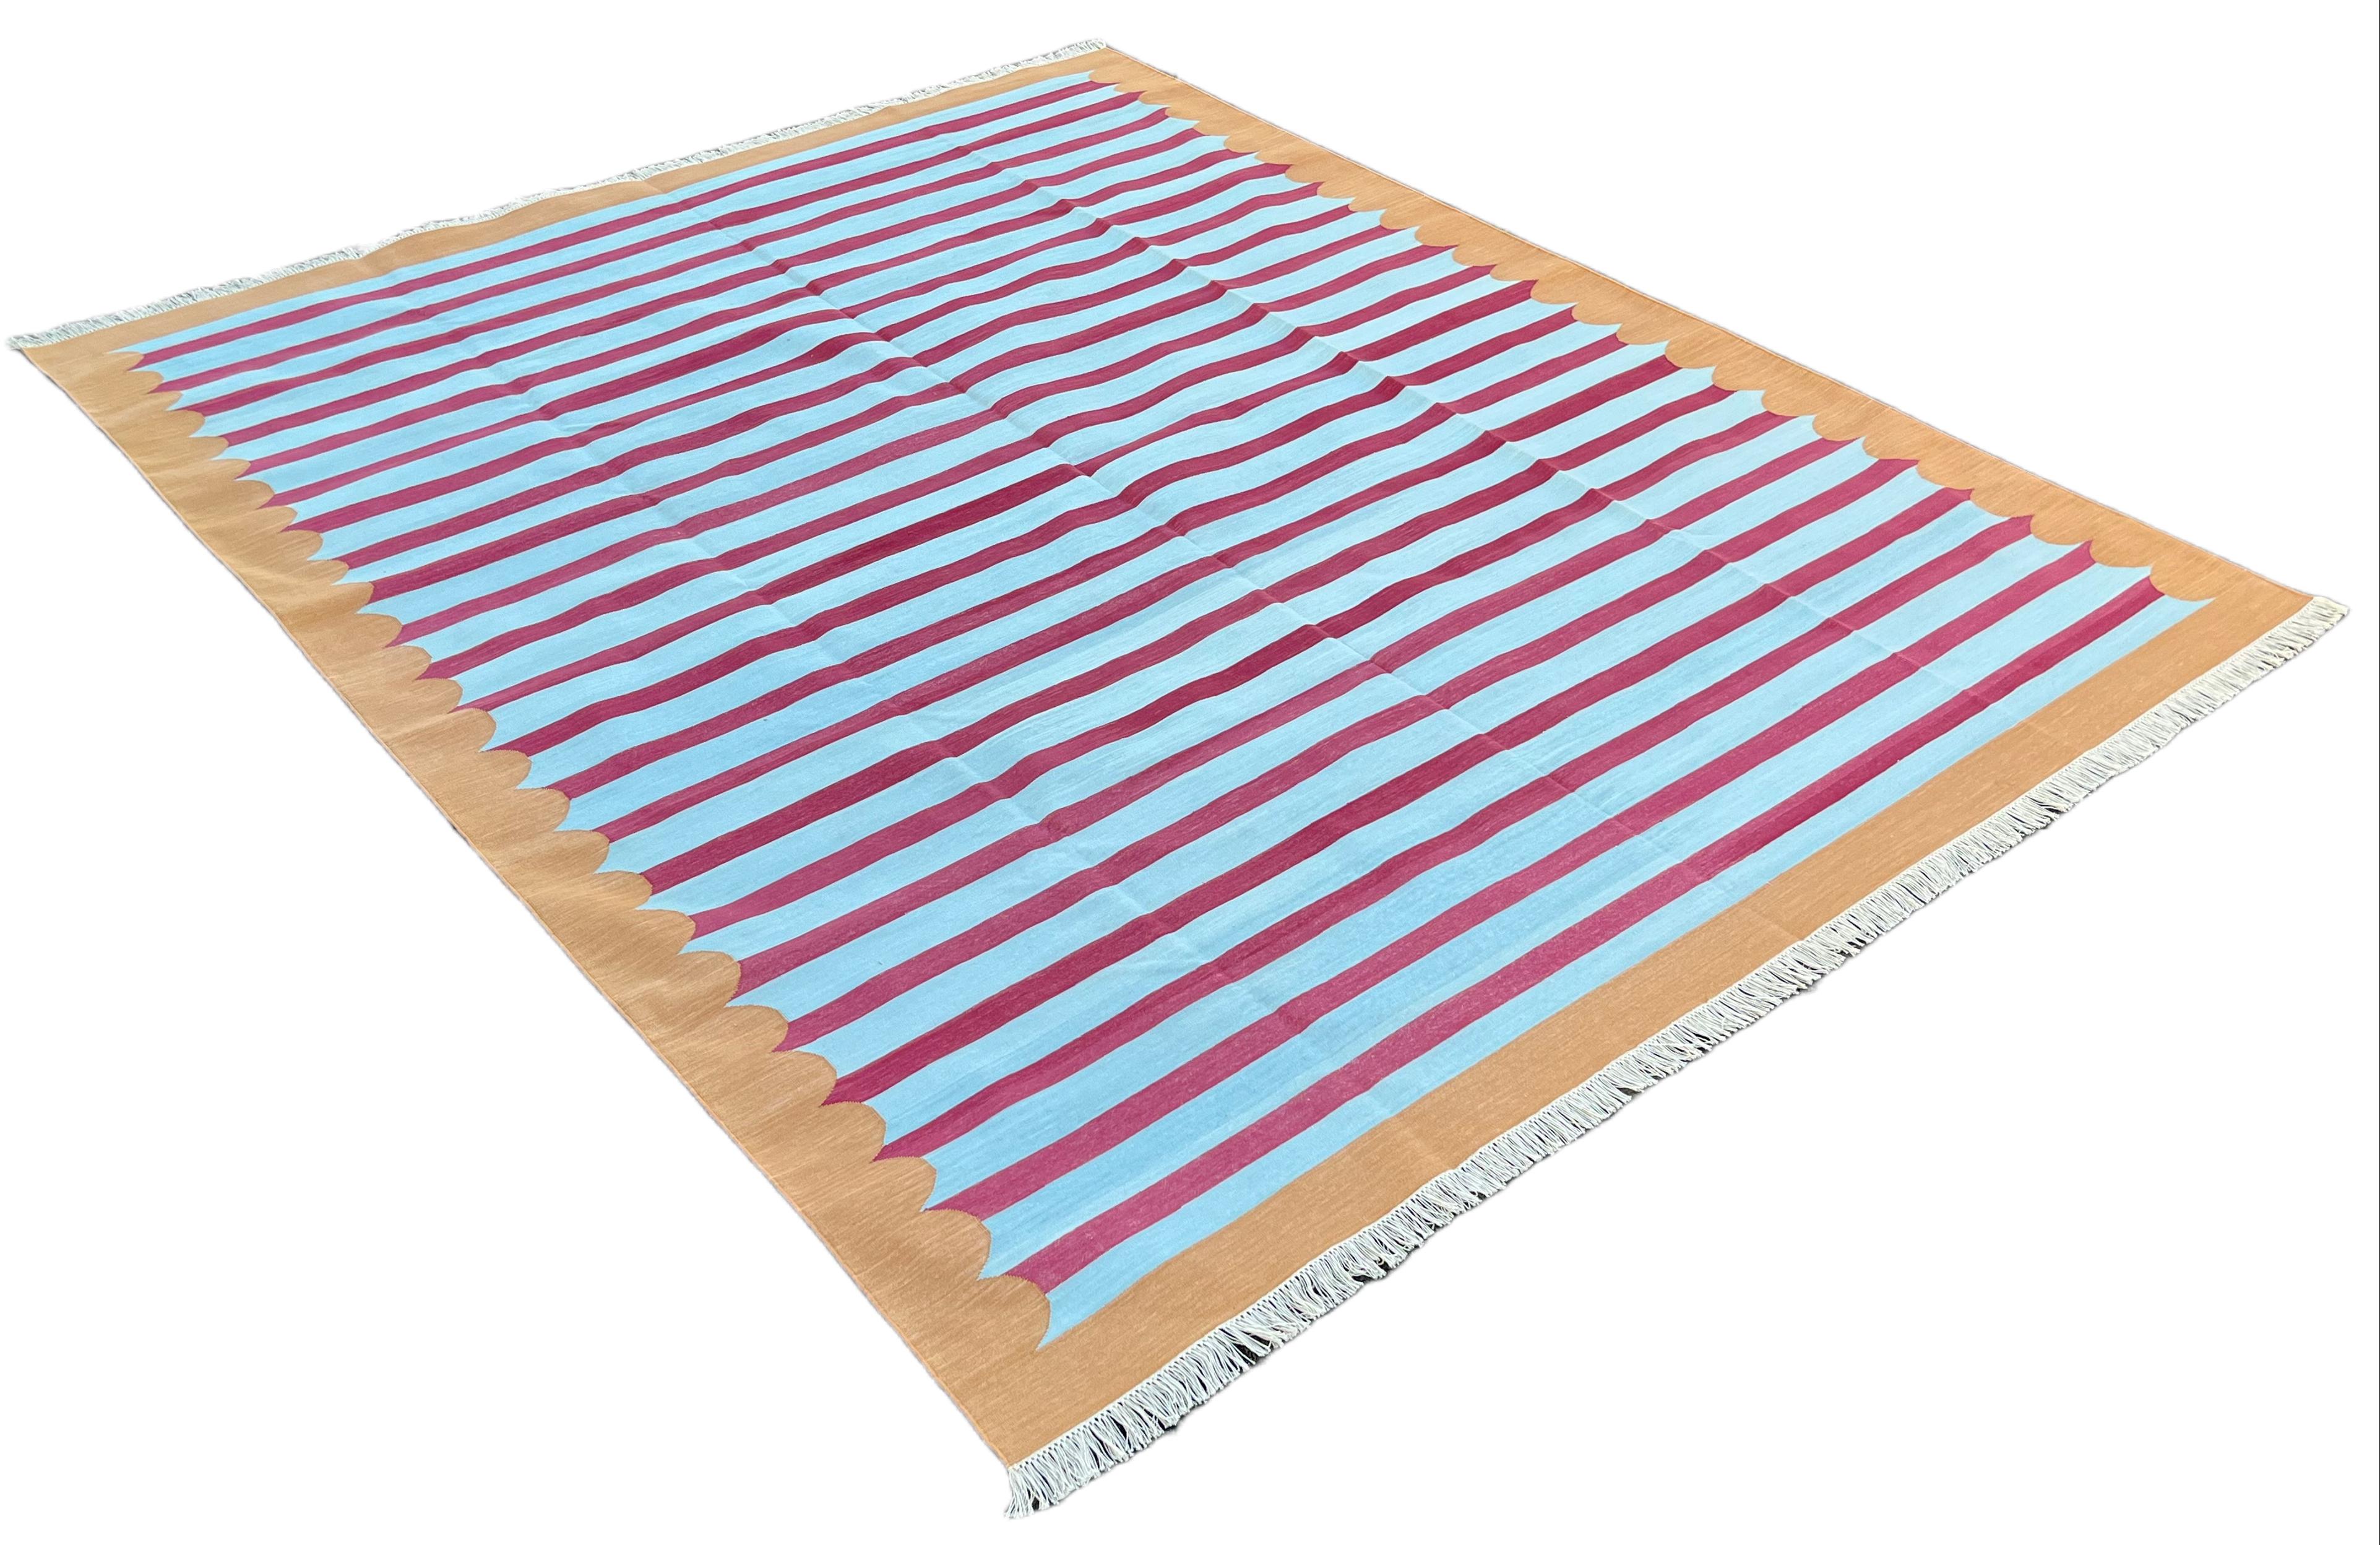 Cotton Natural Vegetable Dyed, Blue, Pink And Tan Striped Indian Rug - 8'x10'
These special flat-weave dhurries are hand-woven with 15 ply 100% cotton yarn. Due to the special manufacturing techniques used to create our rugs, the size and color of